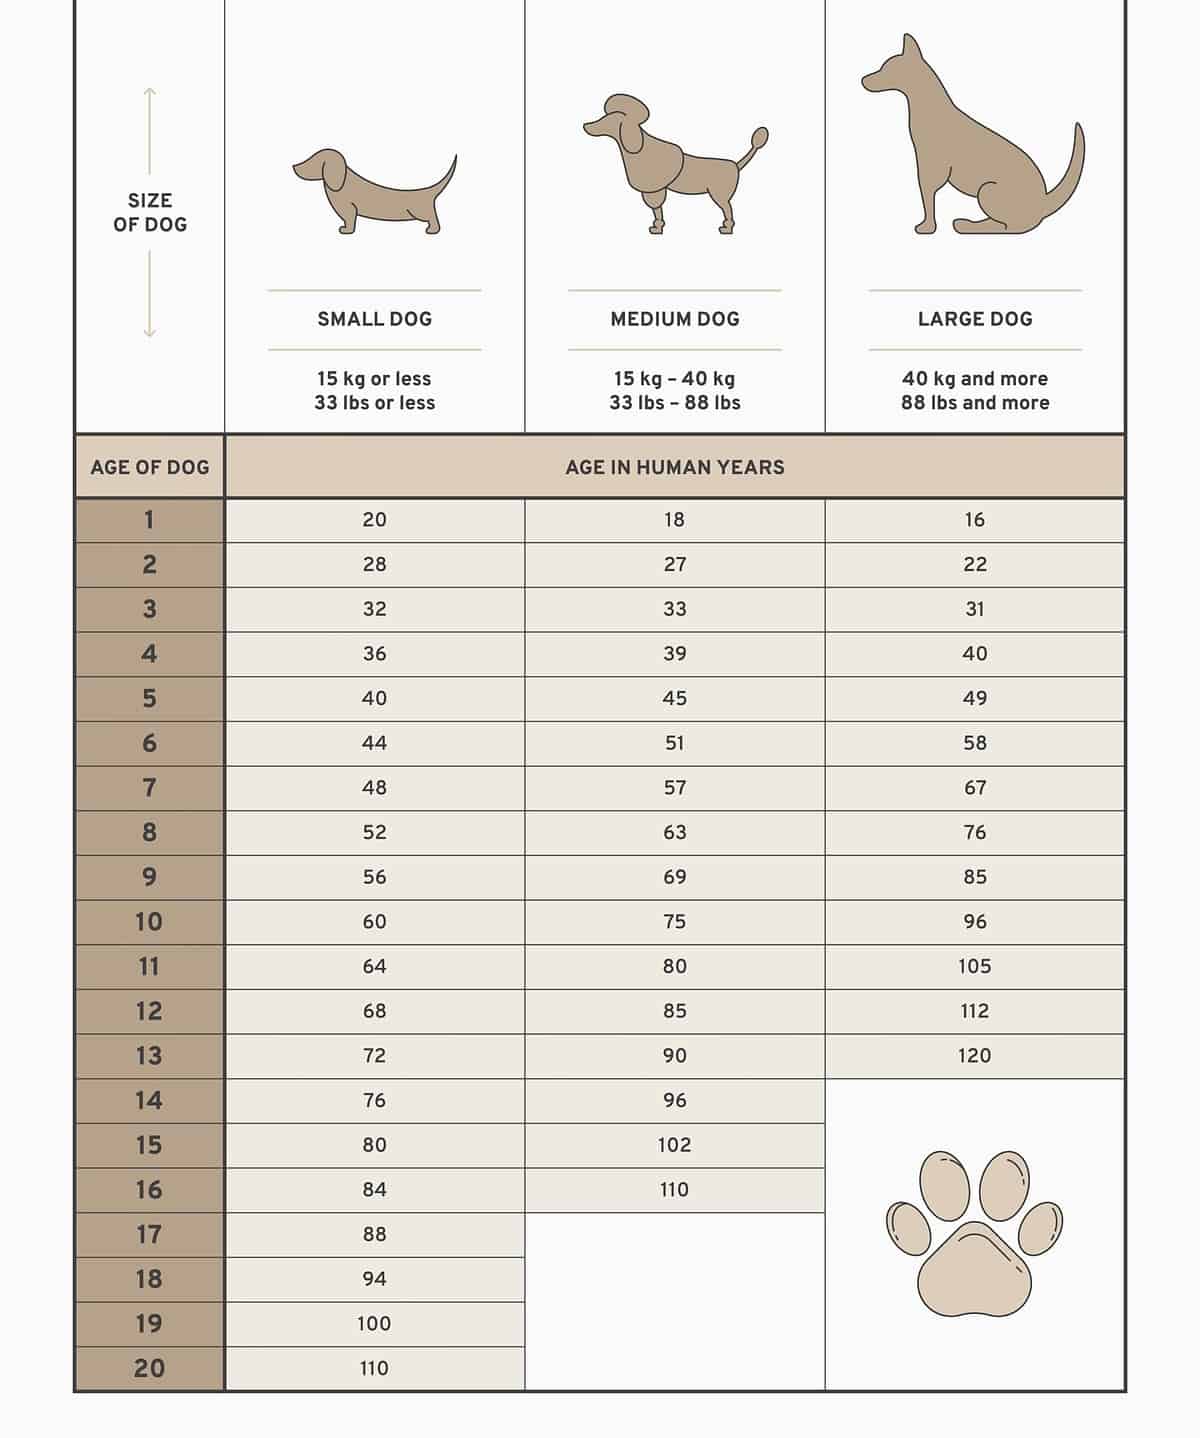 Dog age chart that shows dog years versus human years